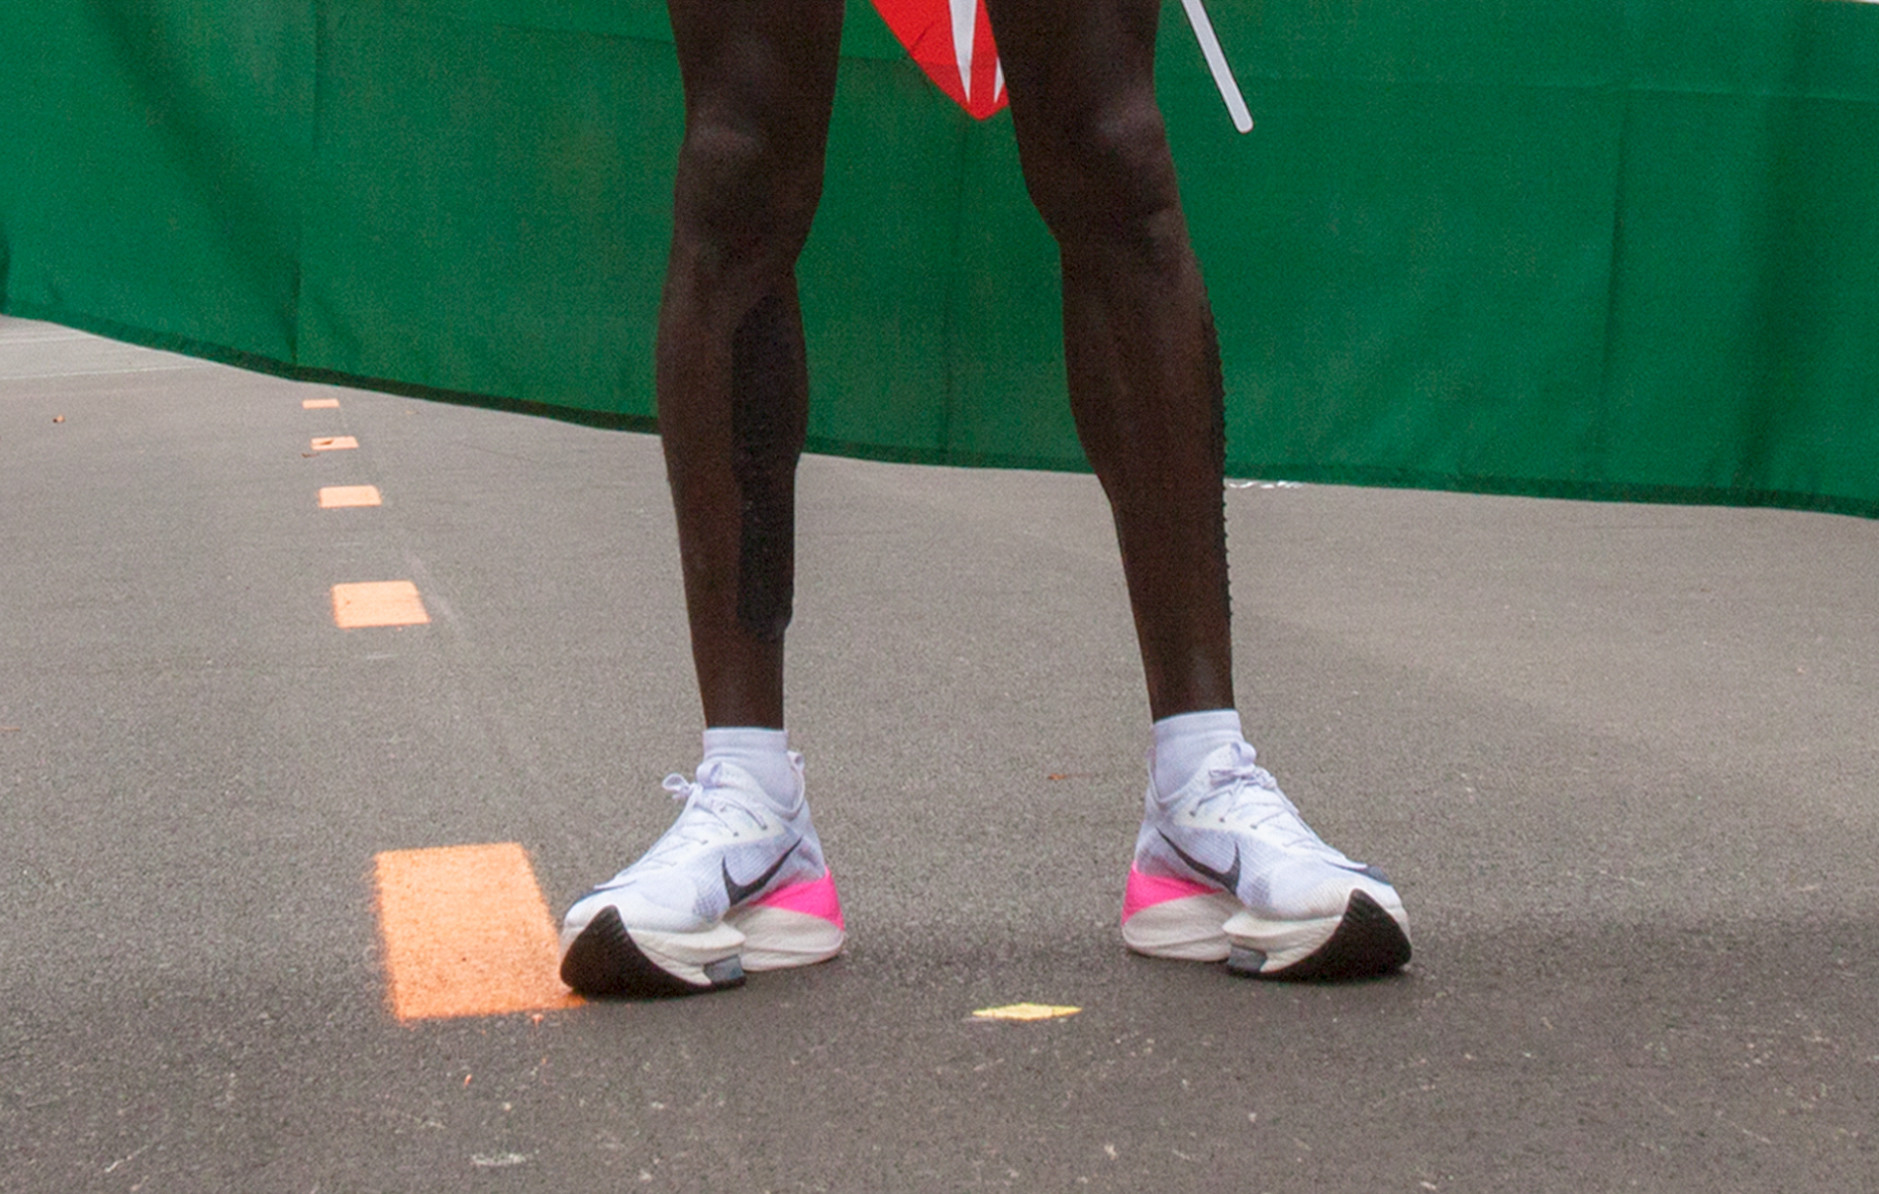 Nike's AlphaFLY shoe, pictured on the feet of Eliud Kipchoge after his sub two-hour marathon effort in Vienna in October, will no longer be legal following Friday's World Athletics ruling ©Getty Images